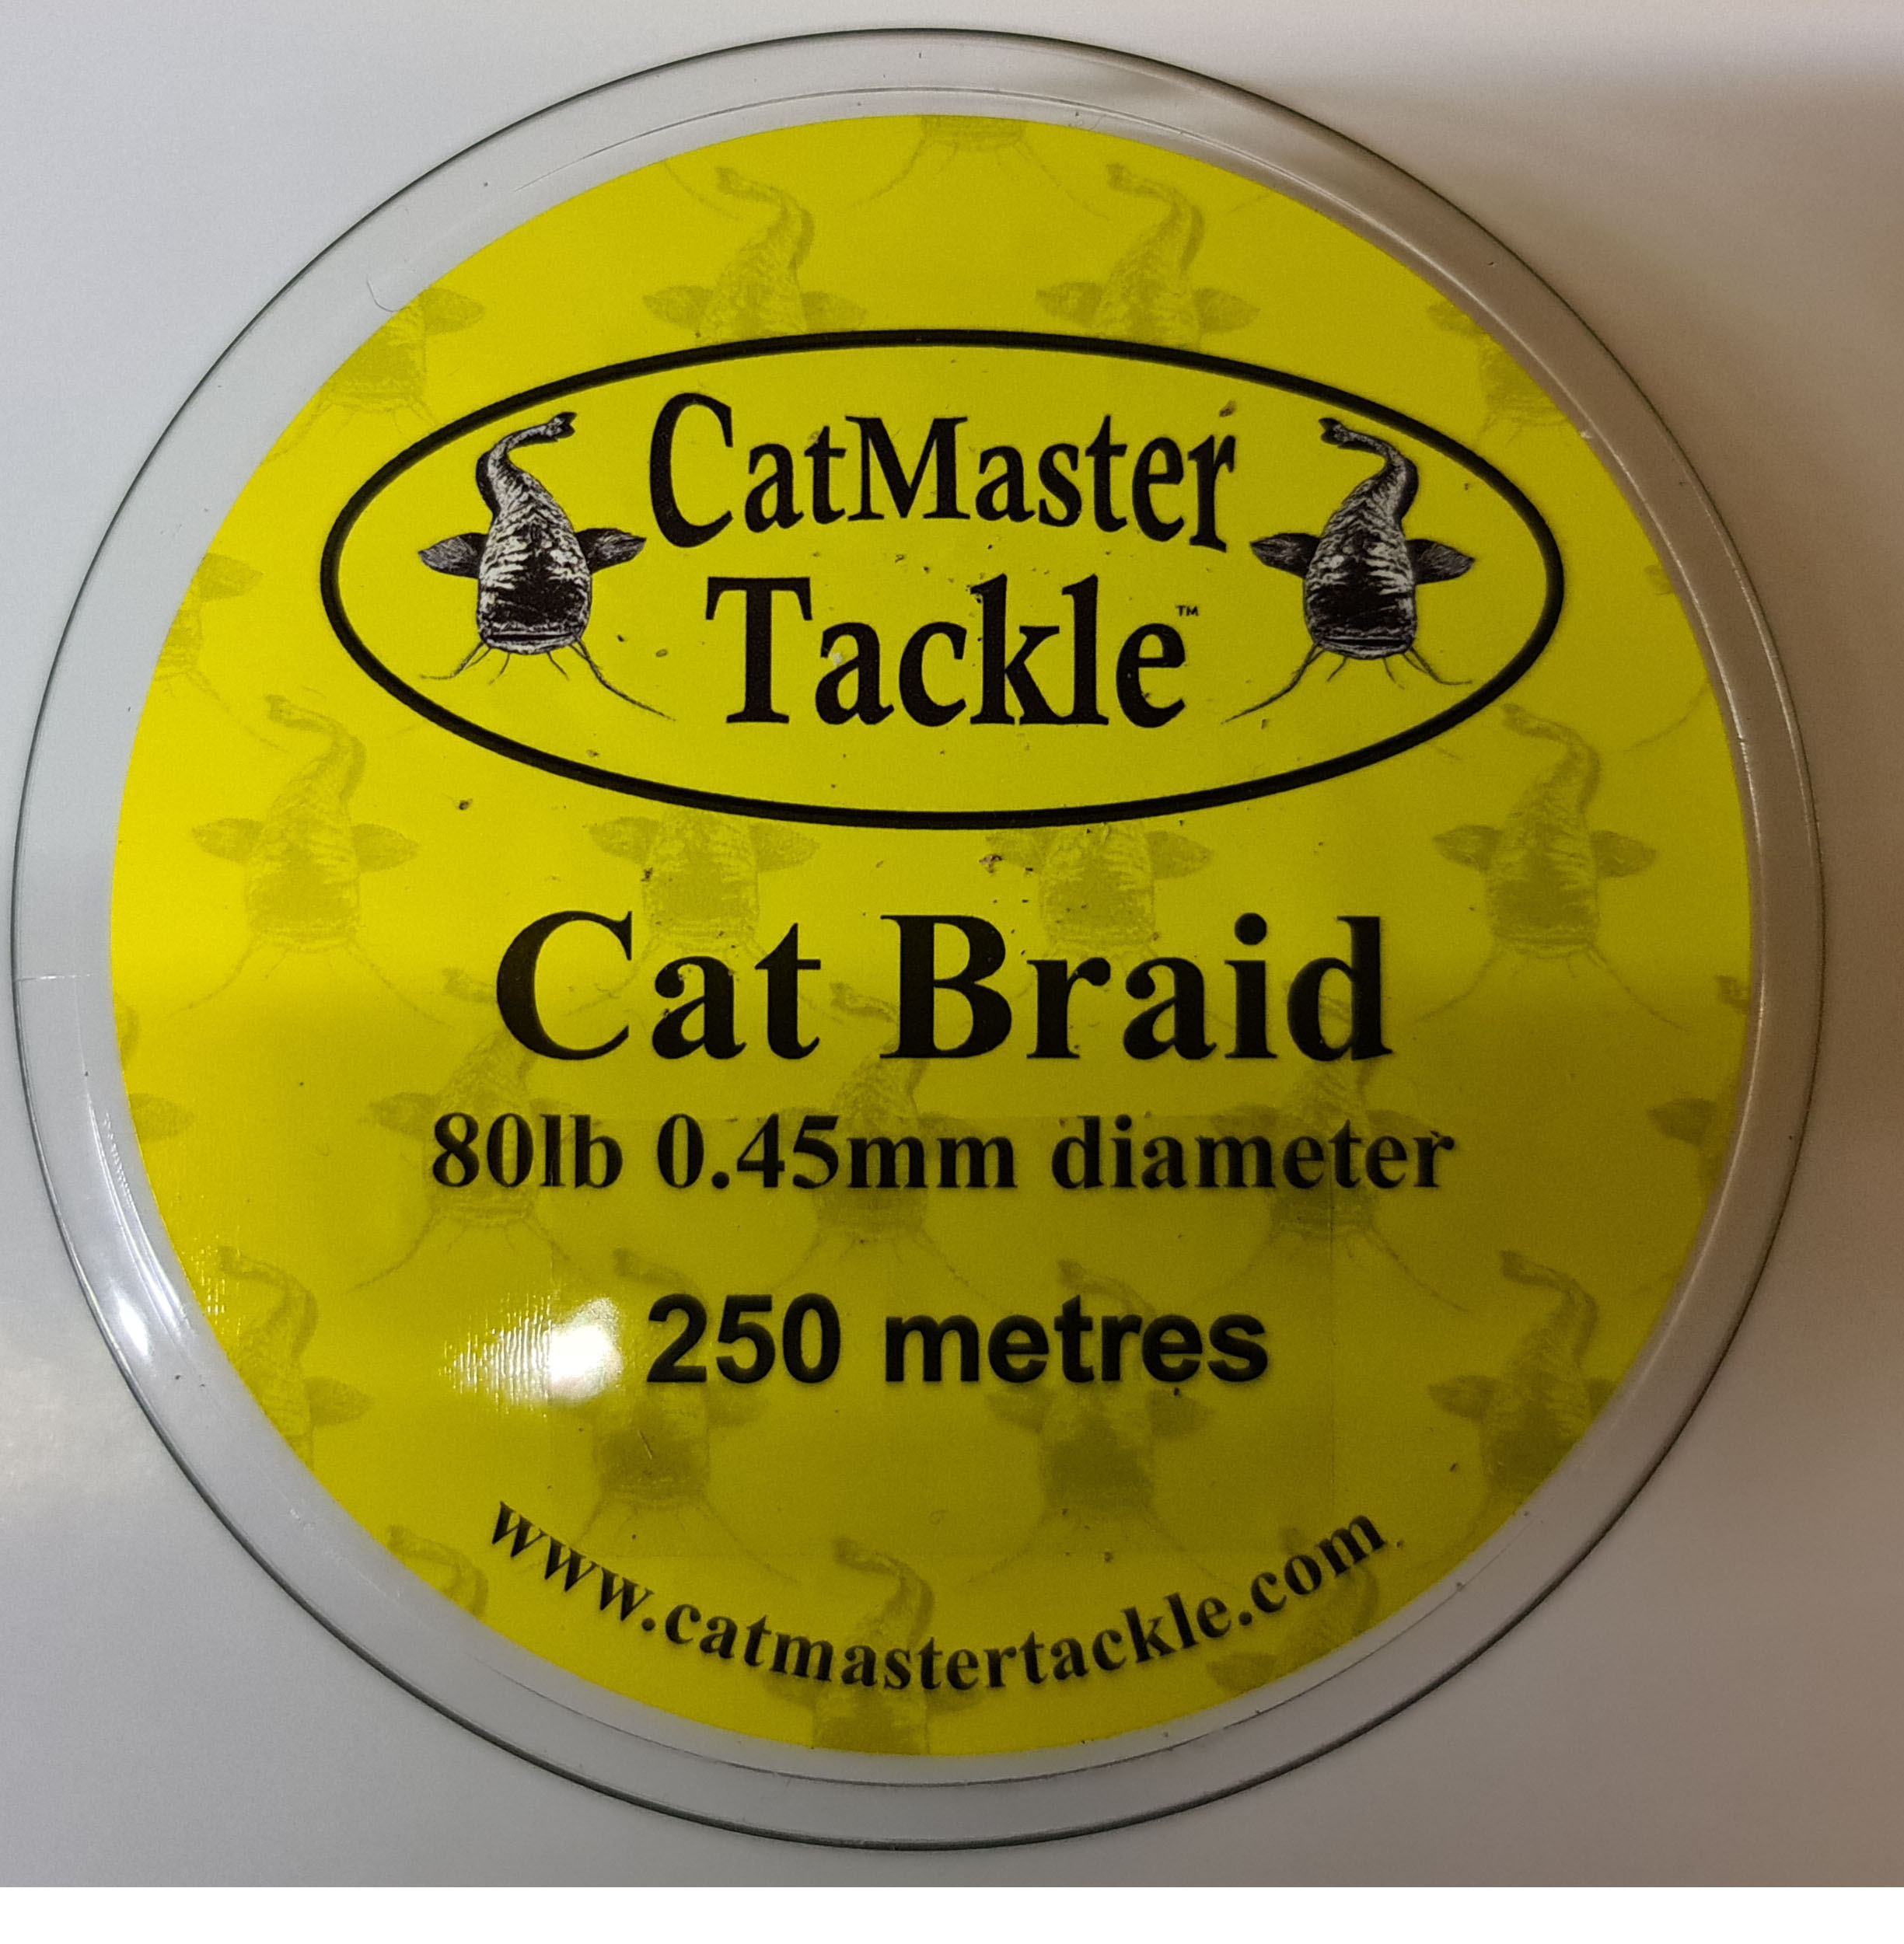 100lb Braided Cat Leader CatMaster Tackle R.T Black